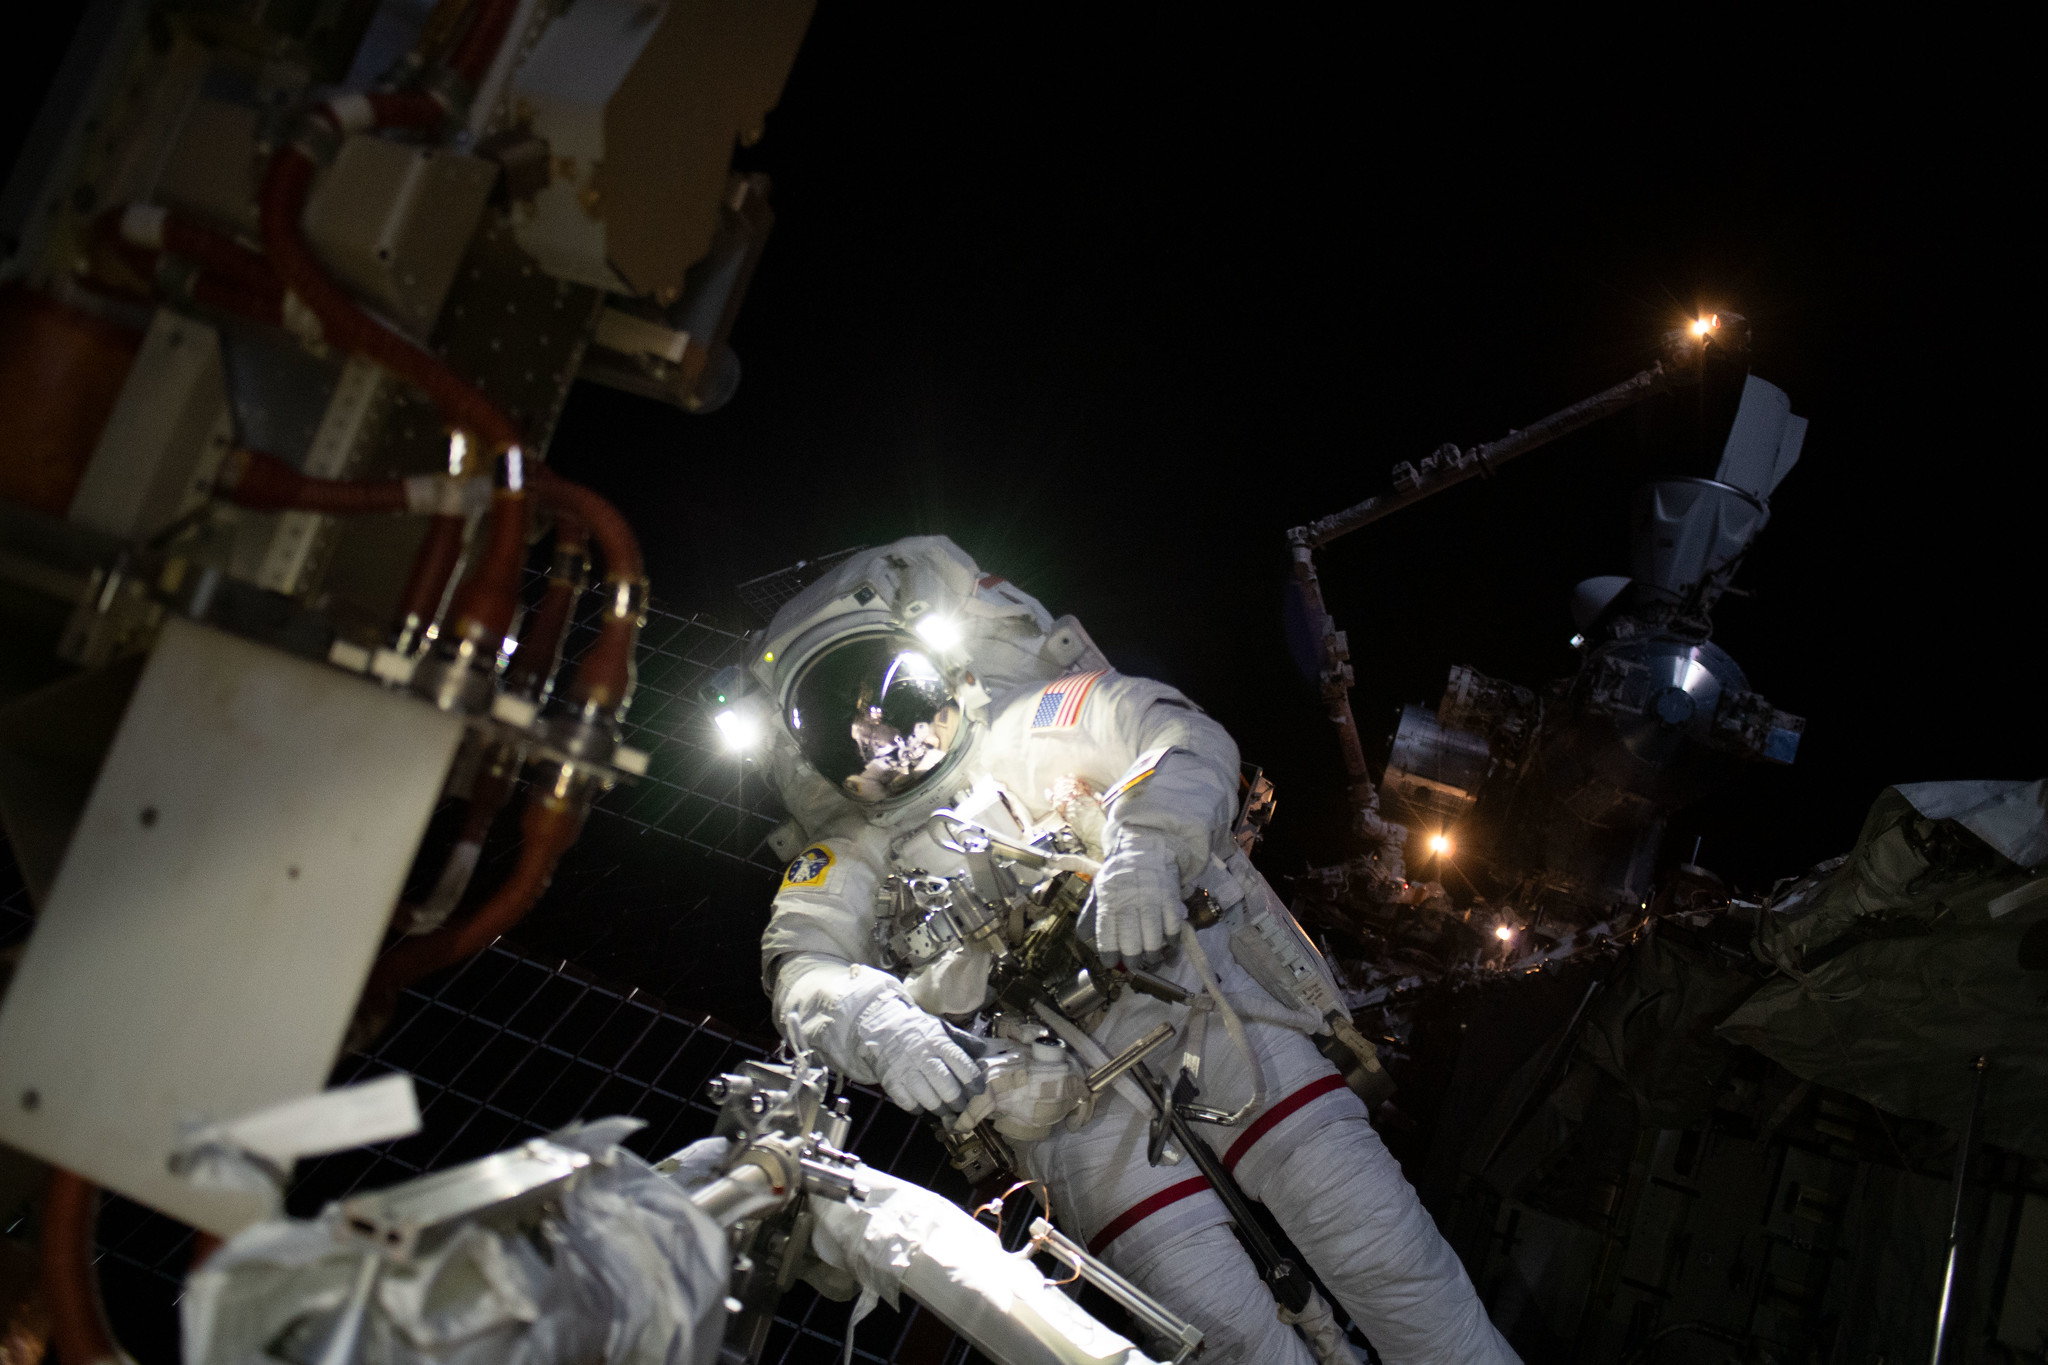 Astronaut Josh Cassada is pictured during a spacewalk on Nov. 15, 2022, to ready the space station for future rollout solar array installation work.